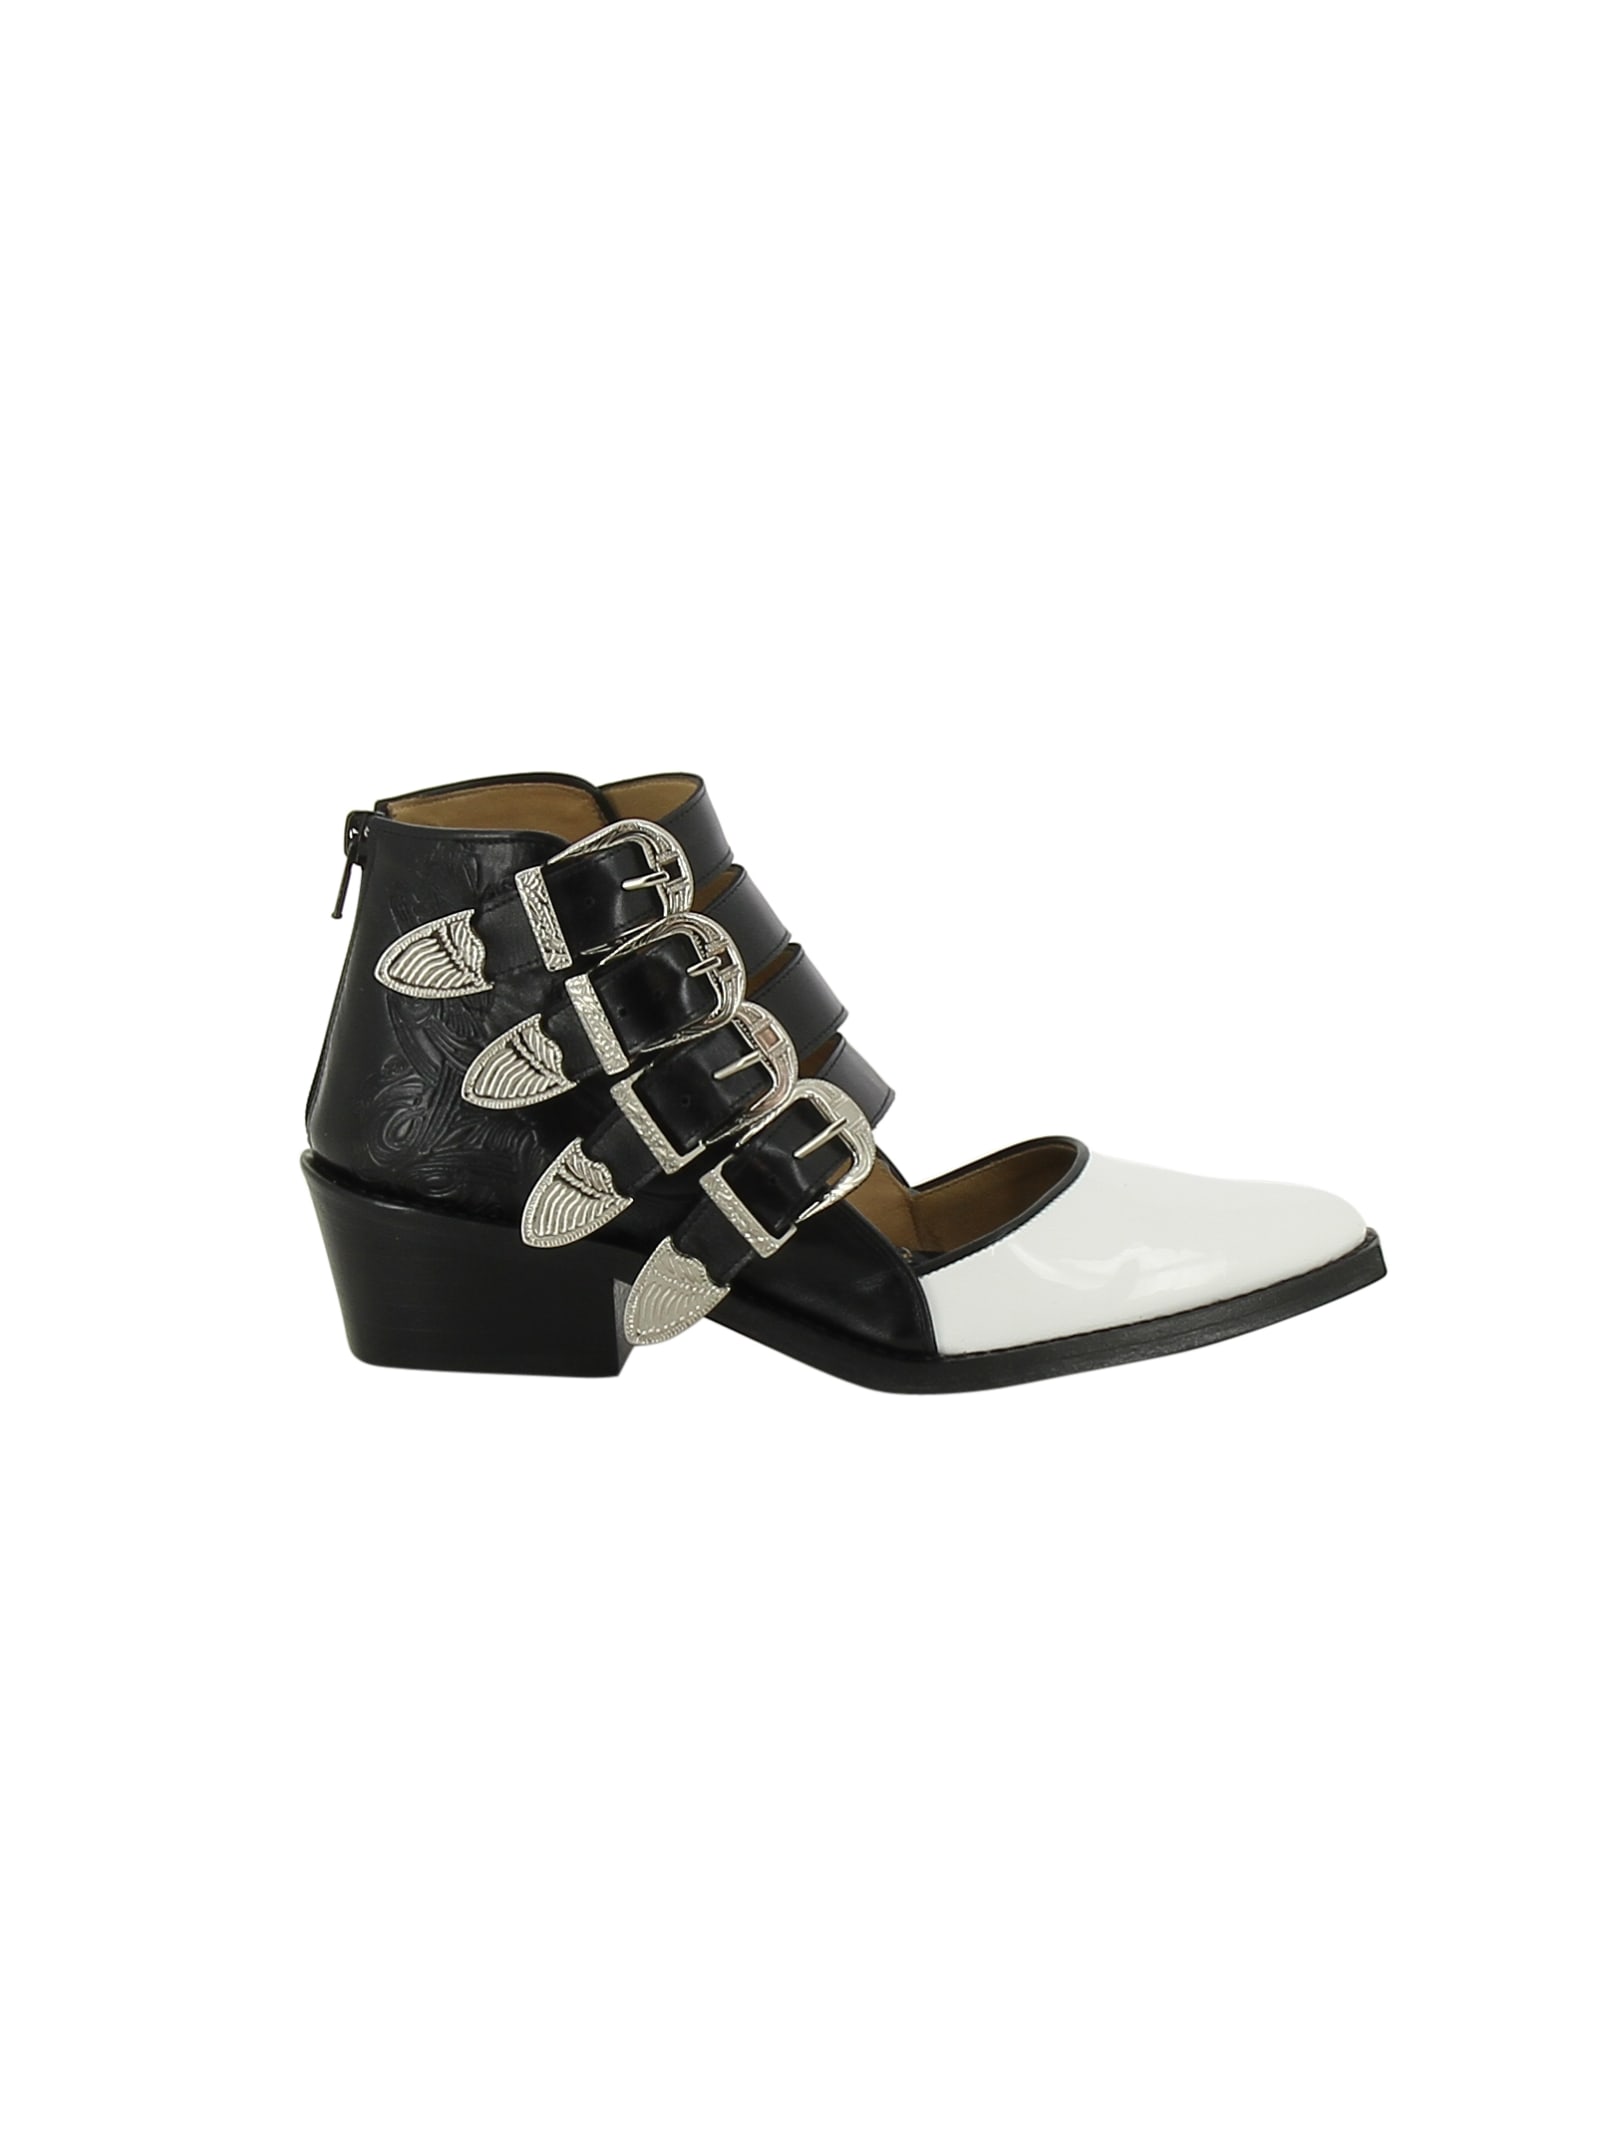 toga ankle boots